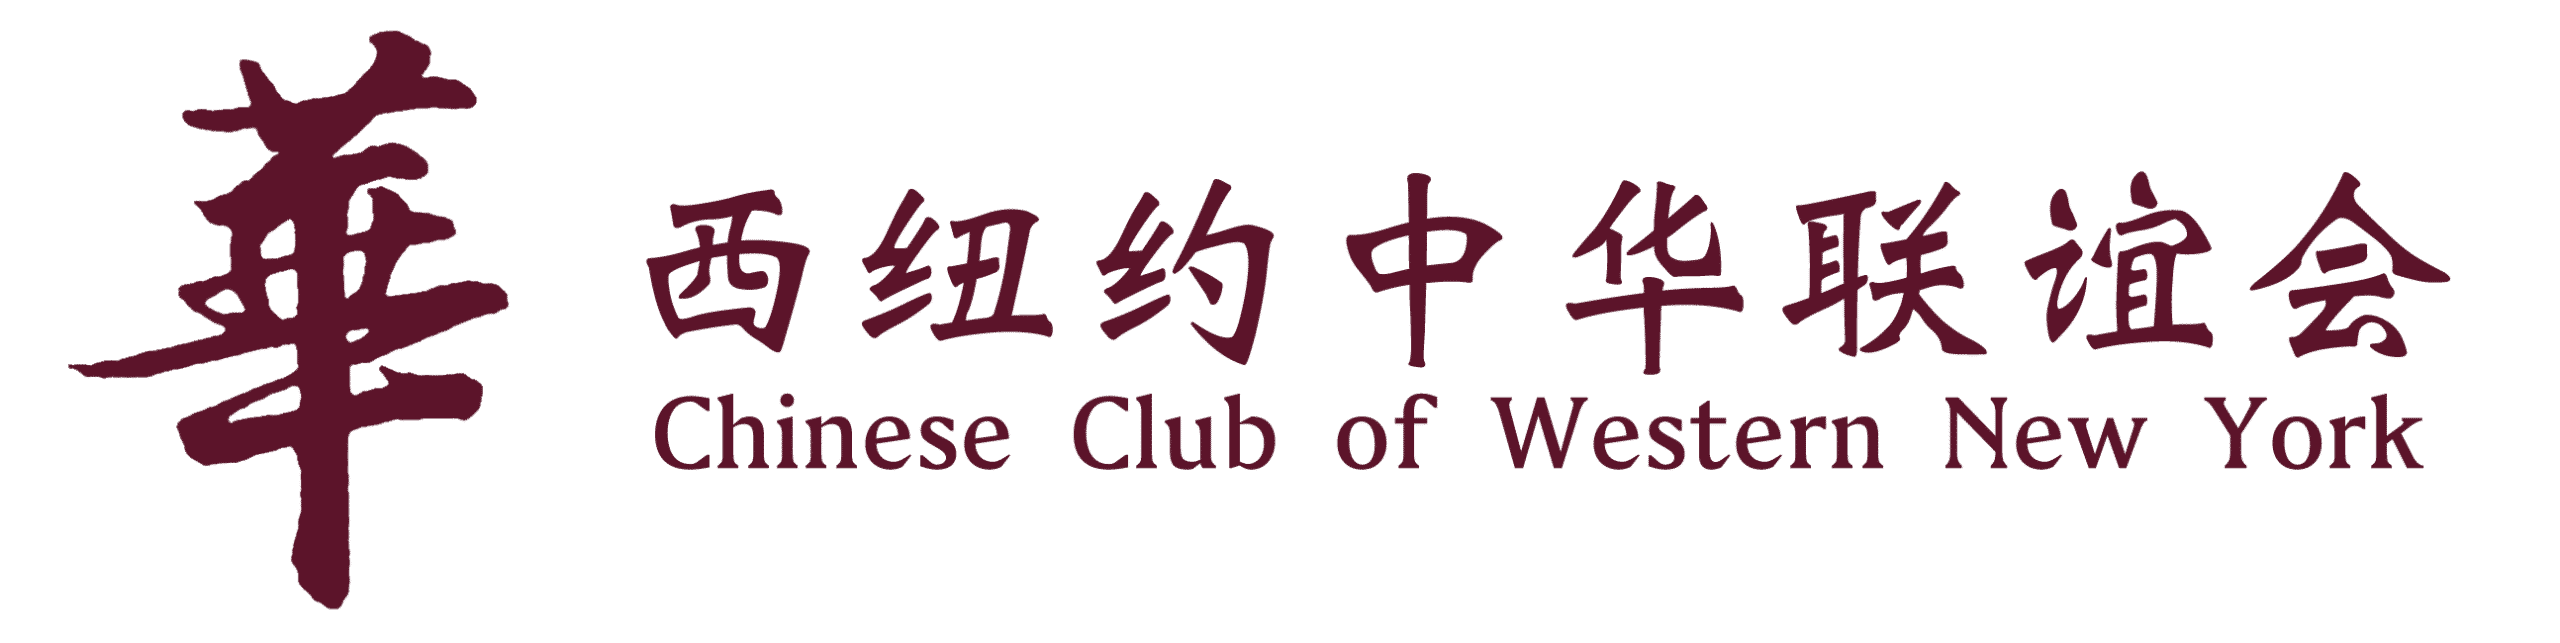 Chinese Club of Western New York